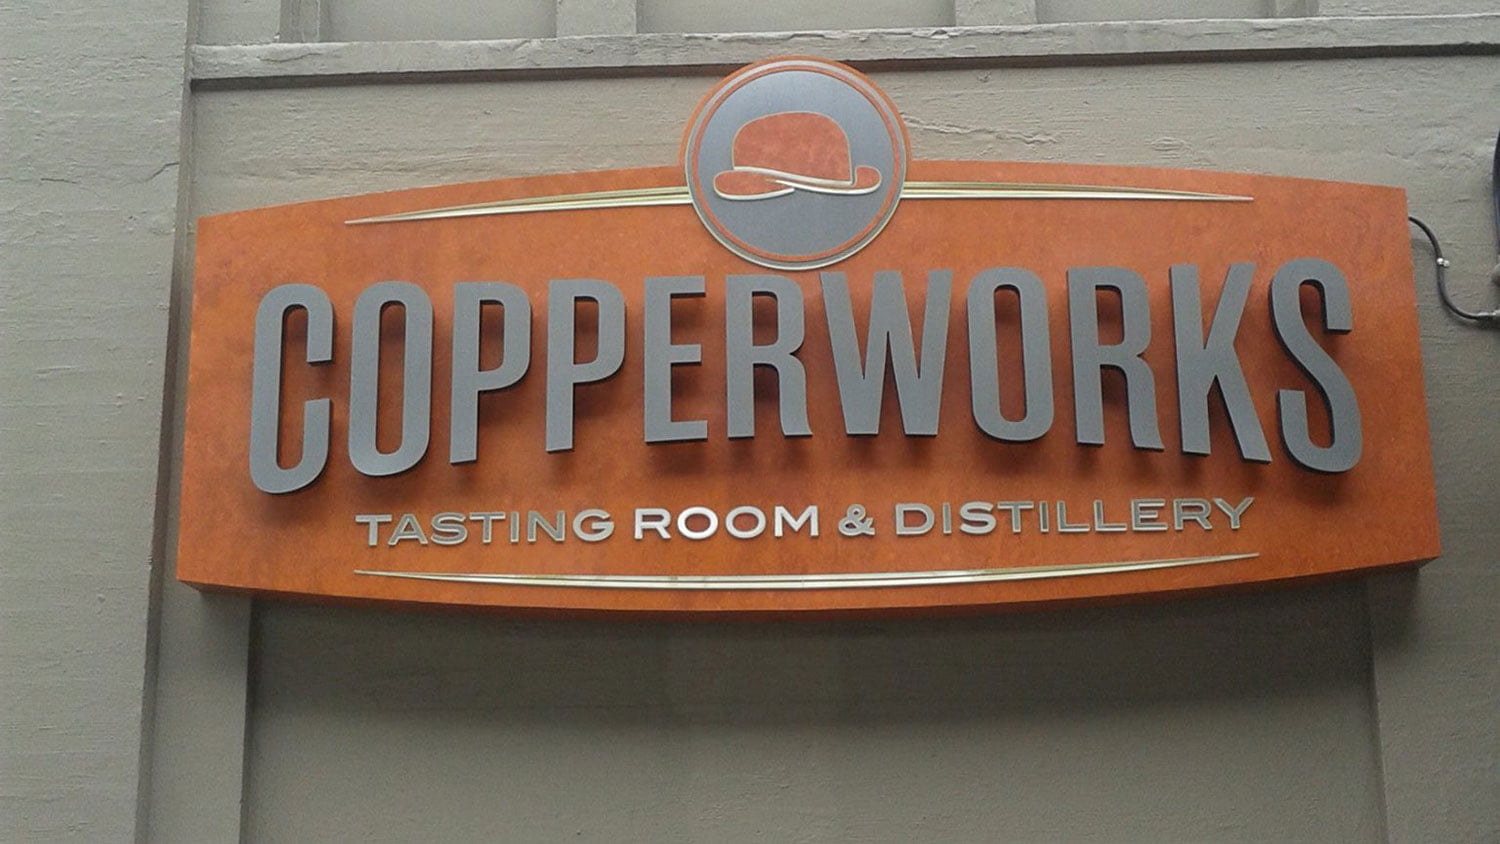 Copperworks distillery and tasting room light up pan sign.